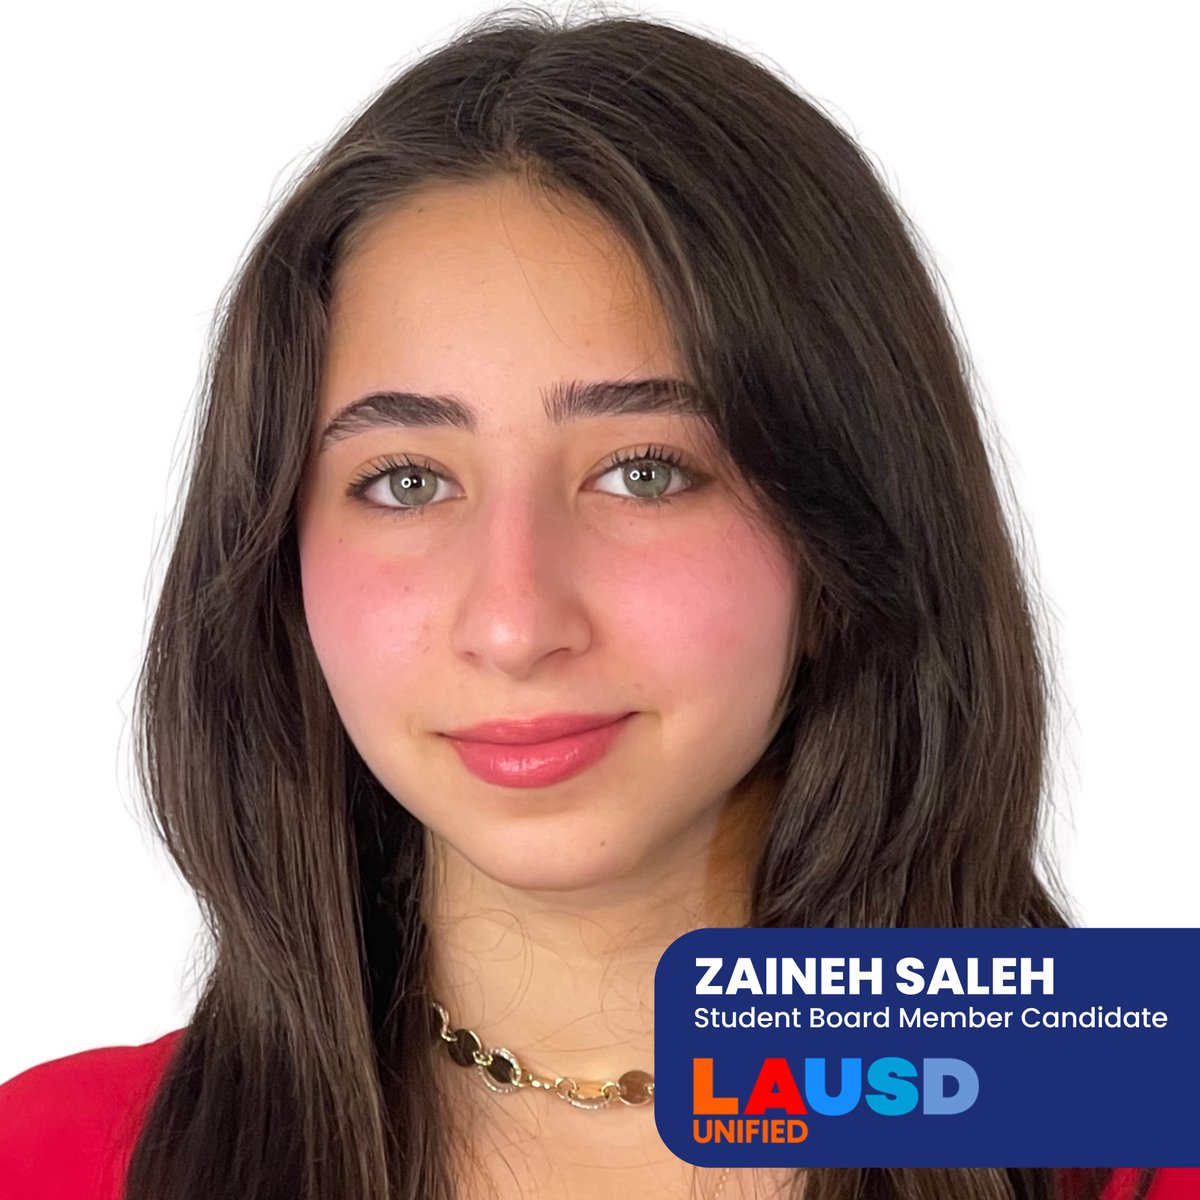 Zaineh, a student at Hollywood High School, is dedicated to enhancing our education system and eager to voice the interests of her fellow students. @LASchools high schoolers: From May 9-23, head to your Schoology page to vote for your Student Board of Education representative.